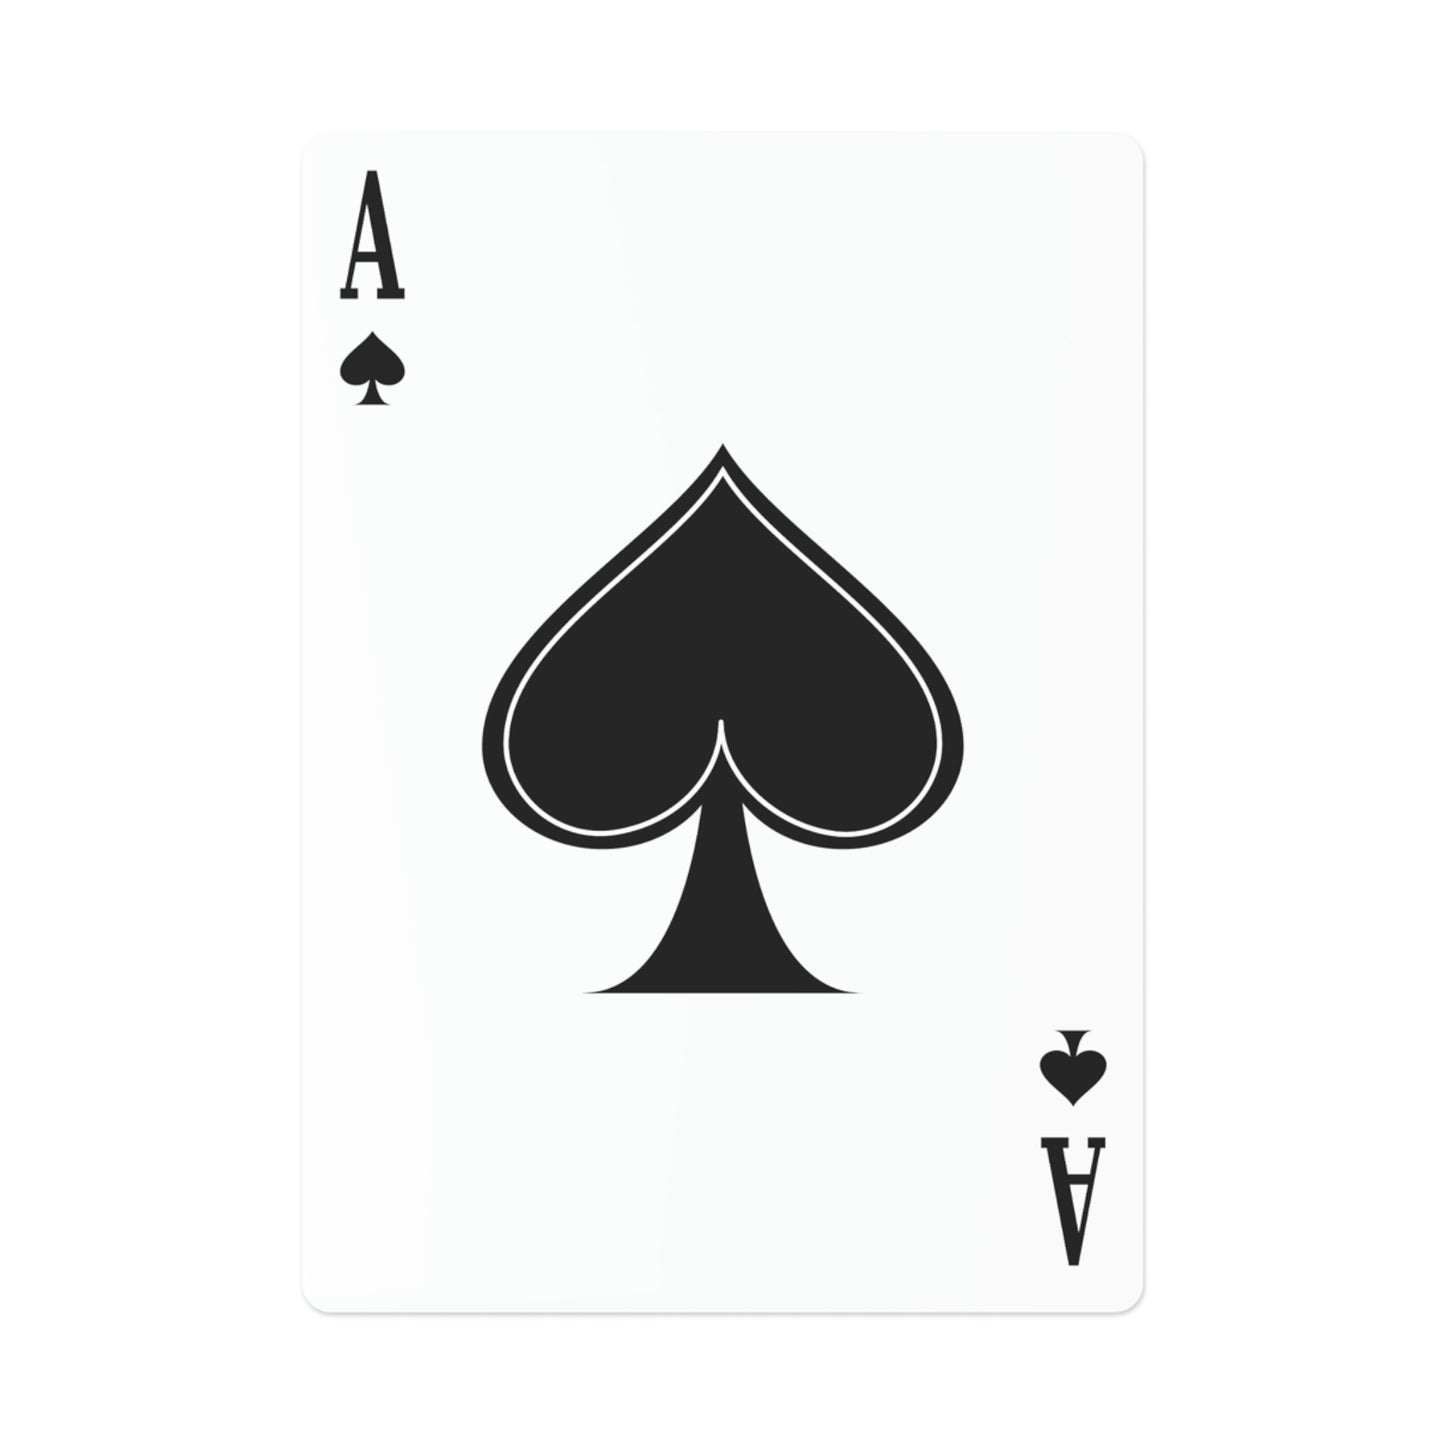 Ashes to Ashes - Playing Cards